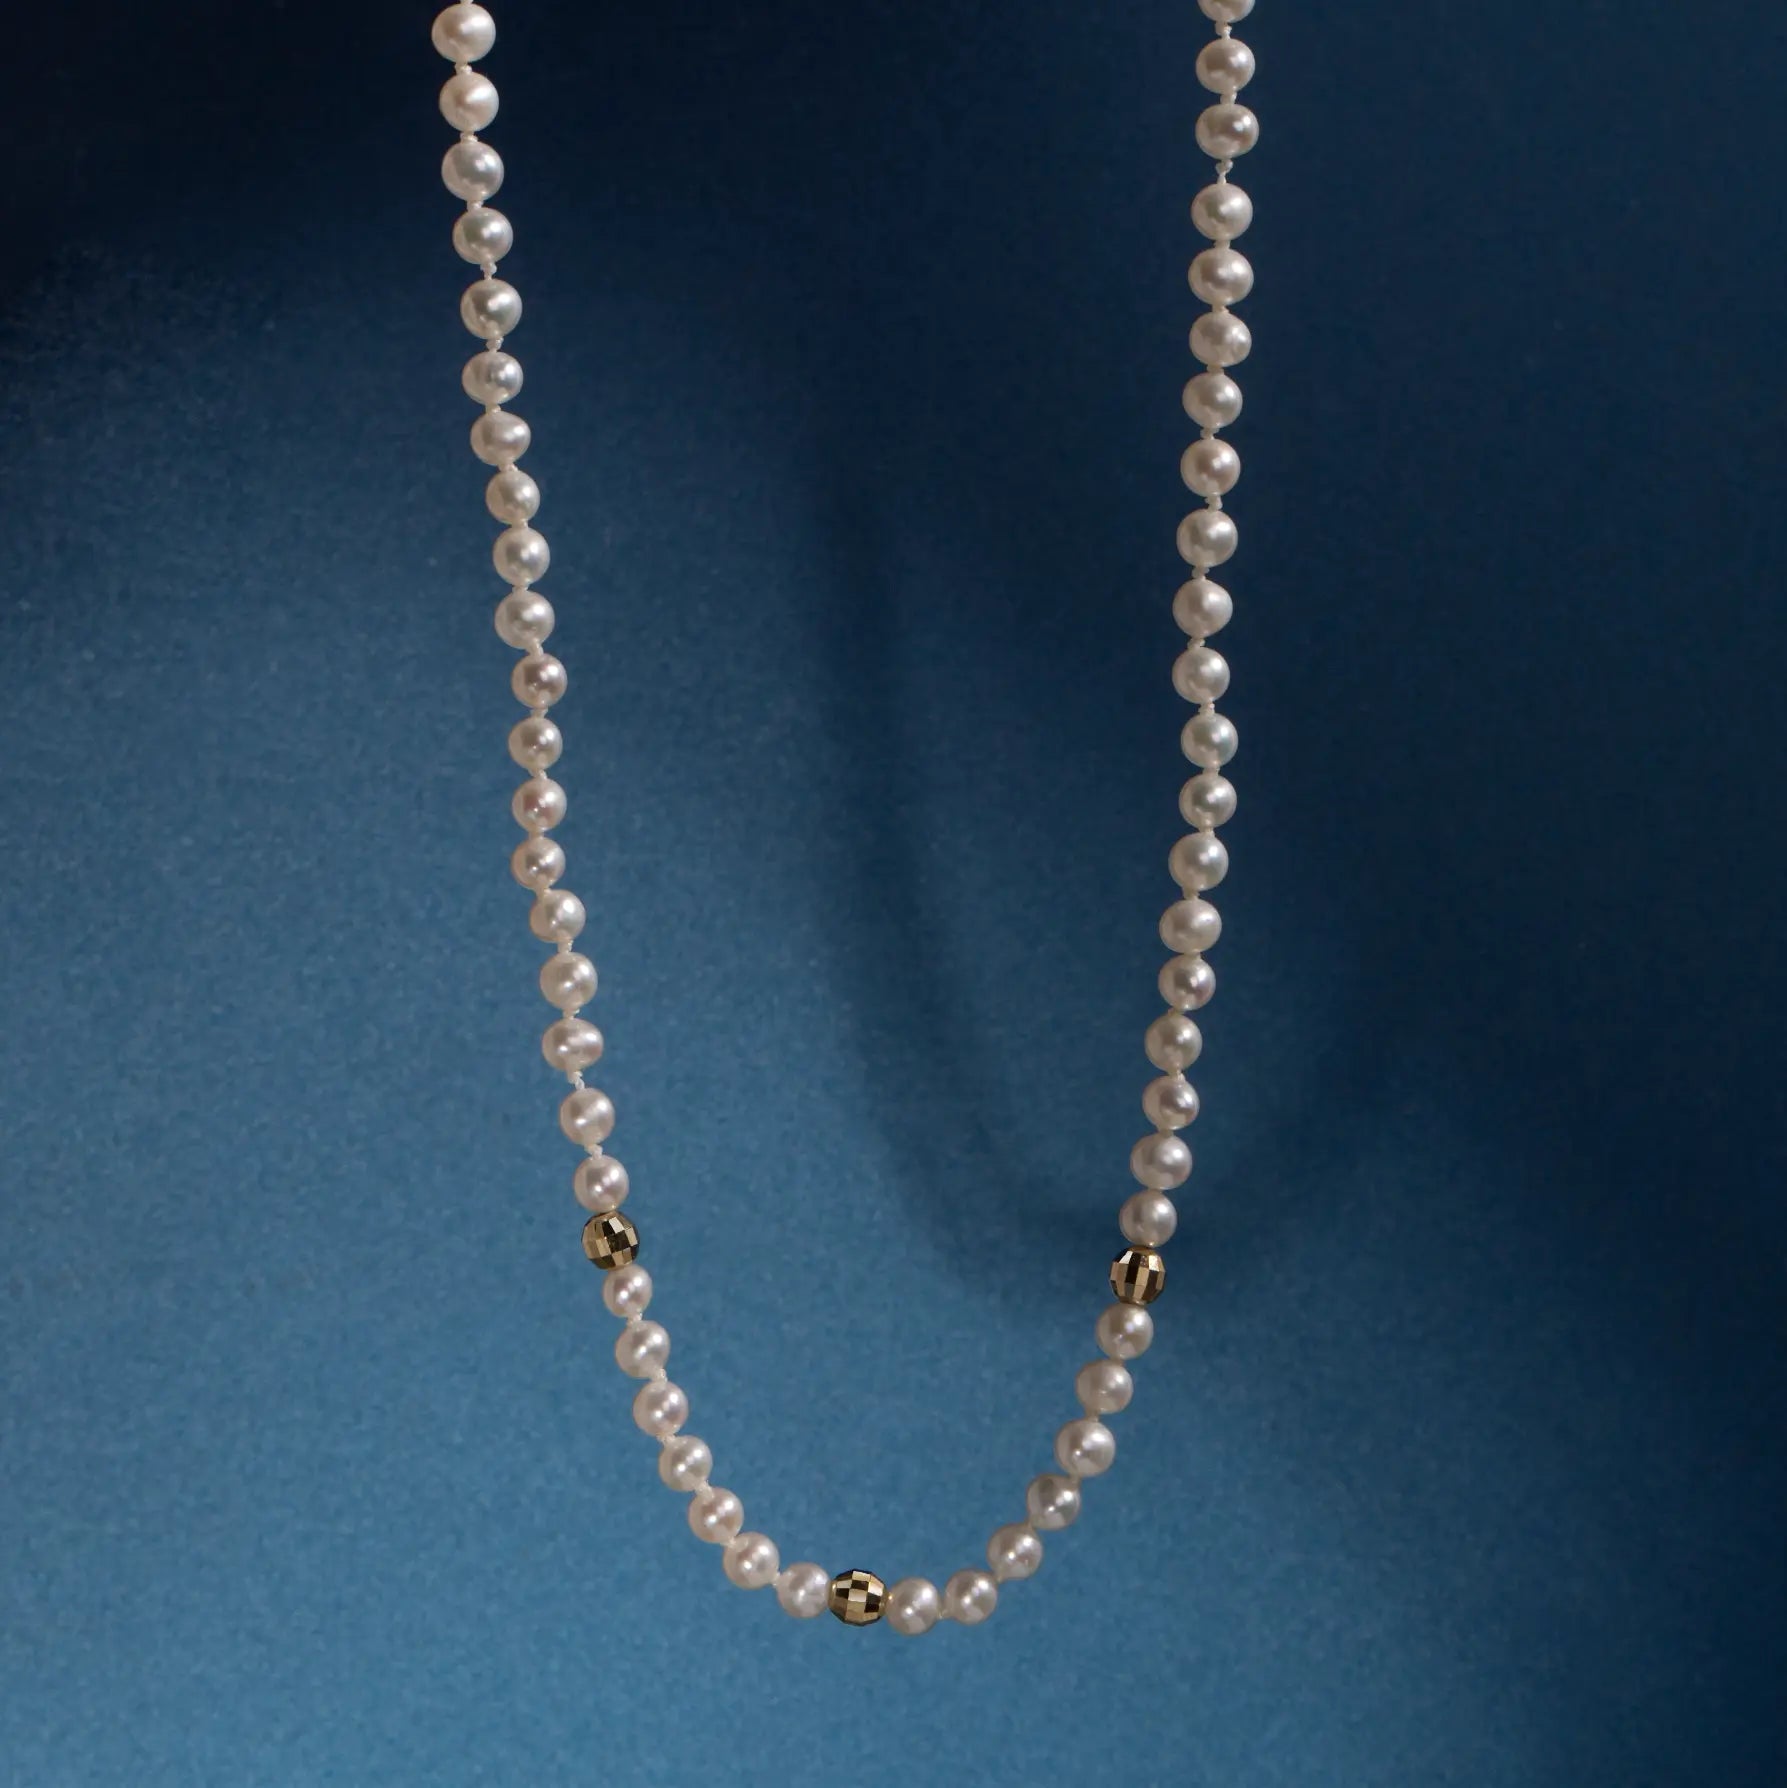 Pearl Necklace with 14K Gold Beads